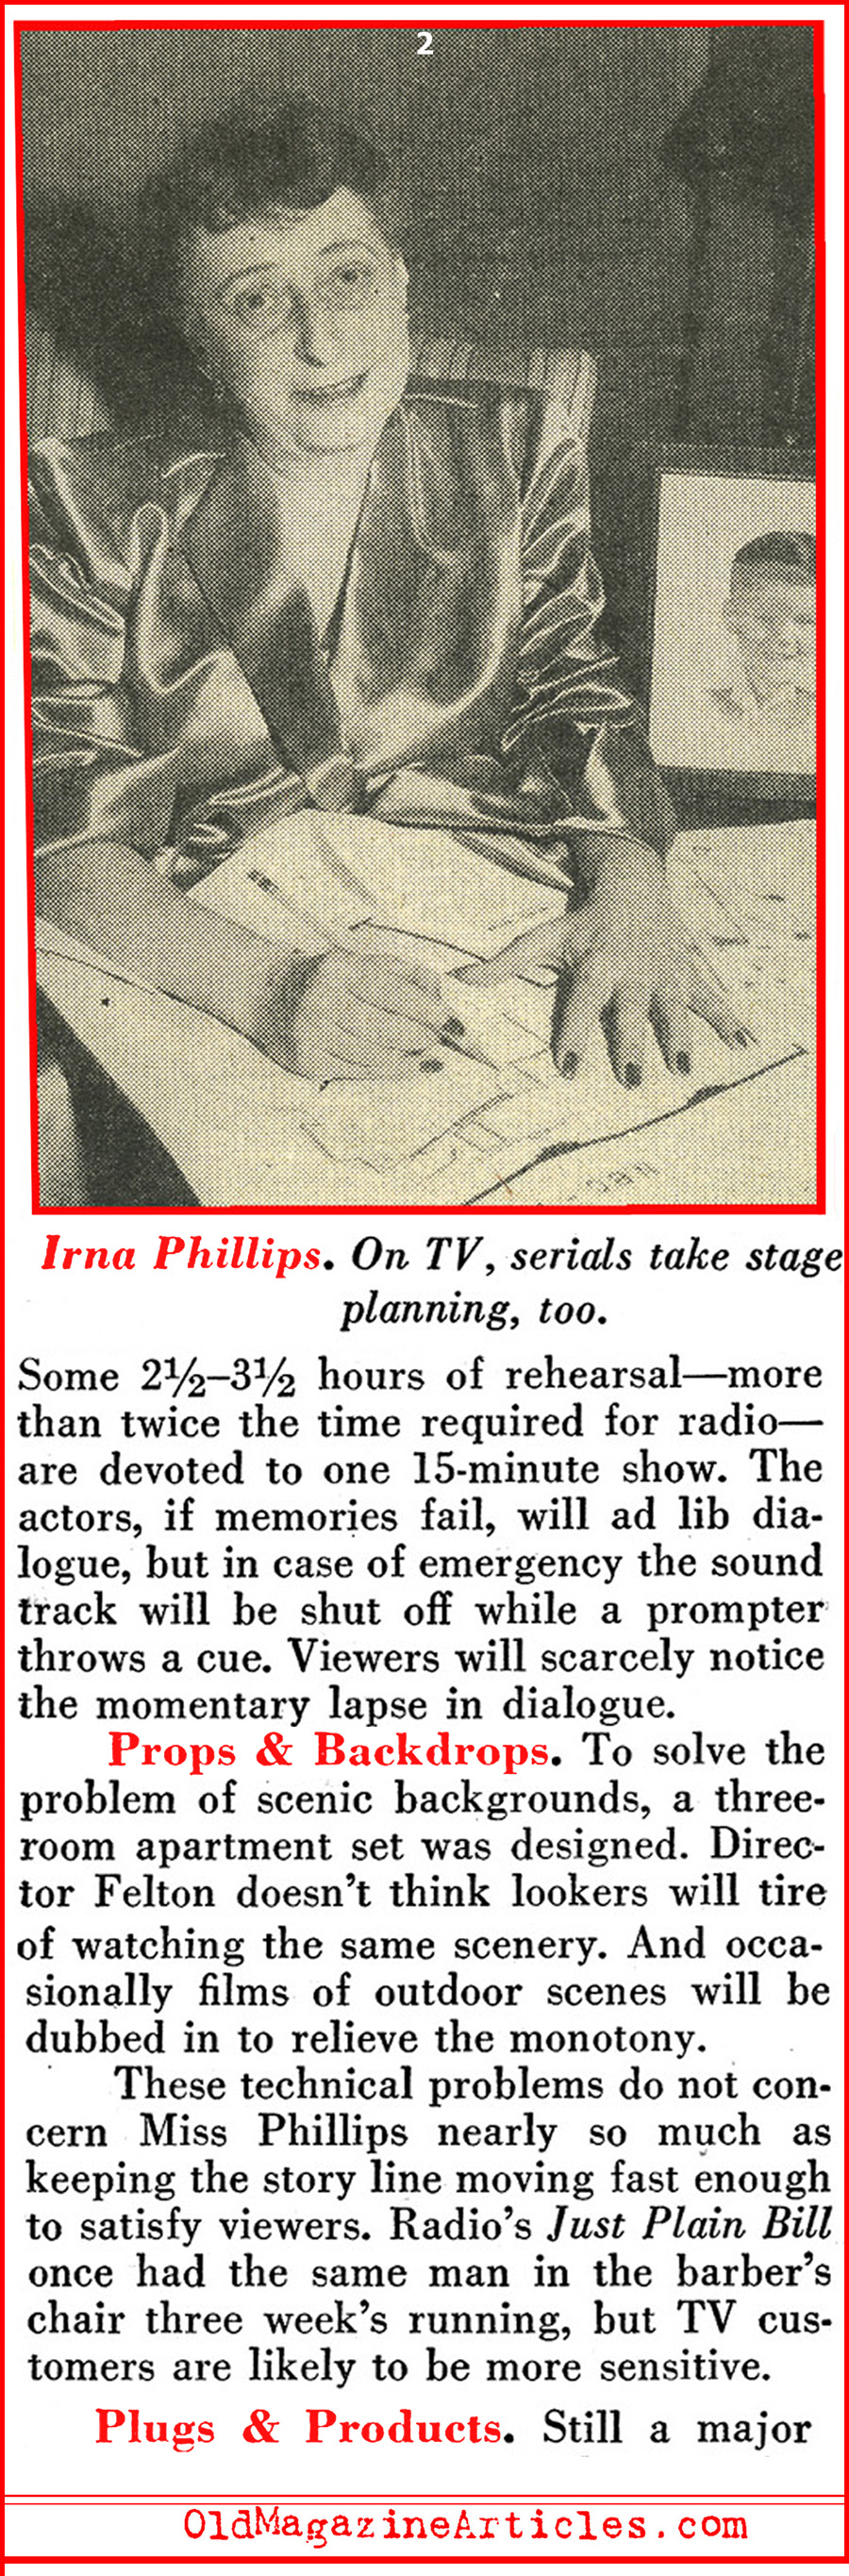 Soap Operas Come to Television (Pathfinder Magazine, 1949)